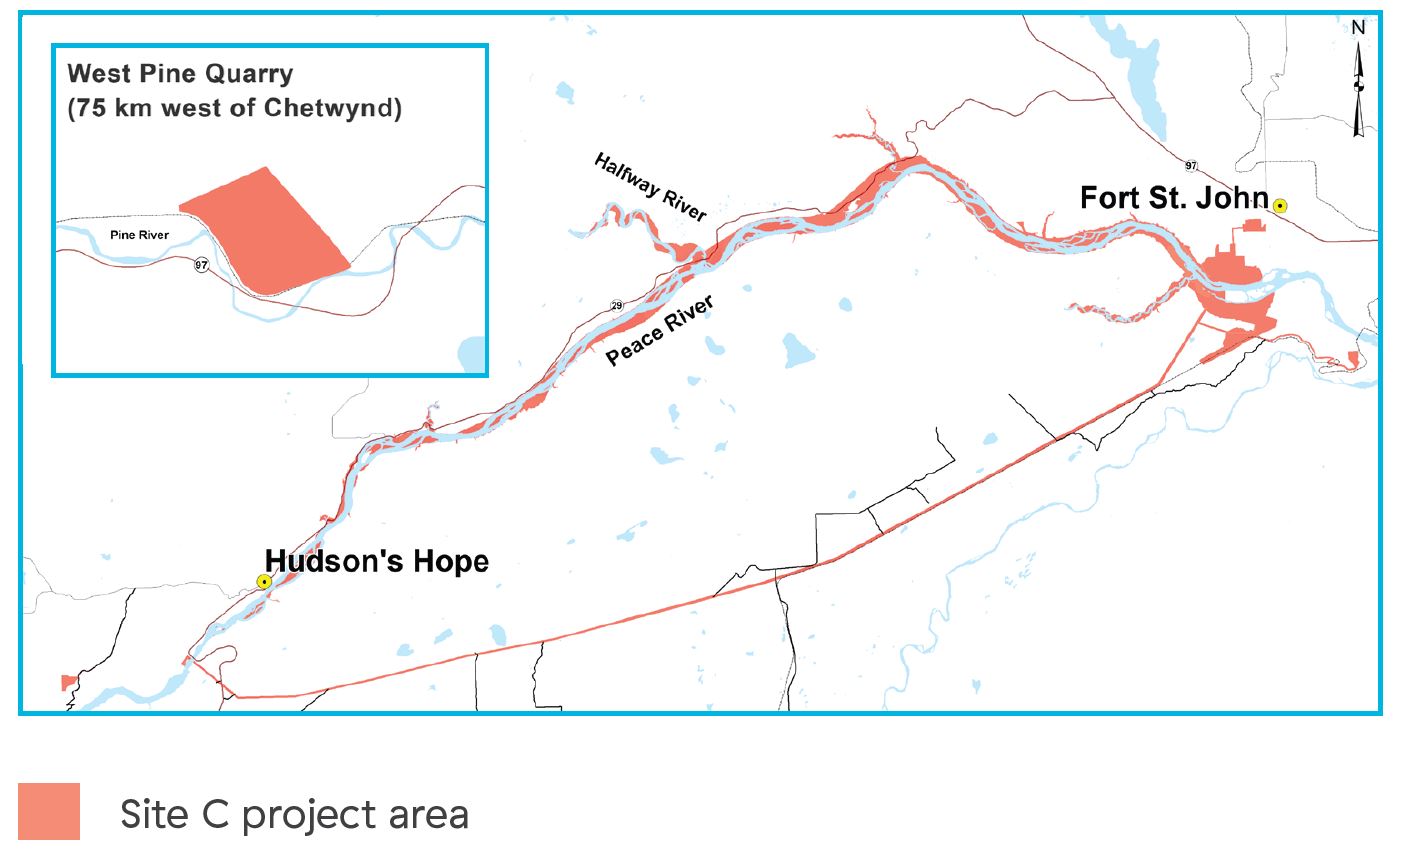 Map showing Site C project areas